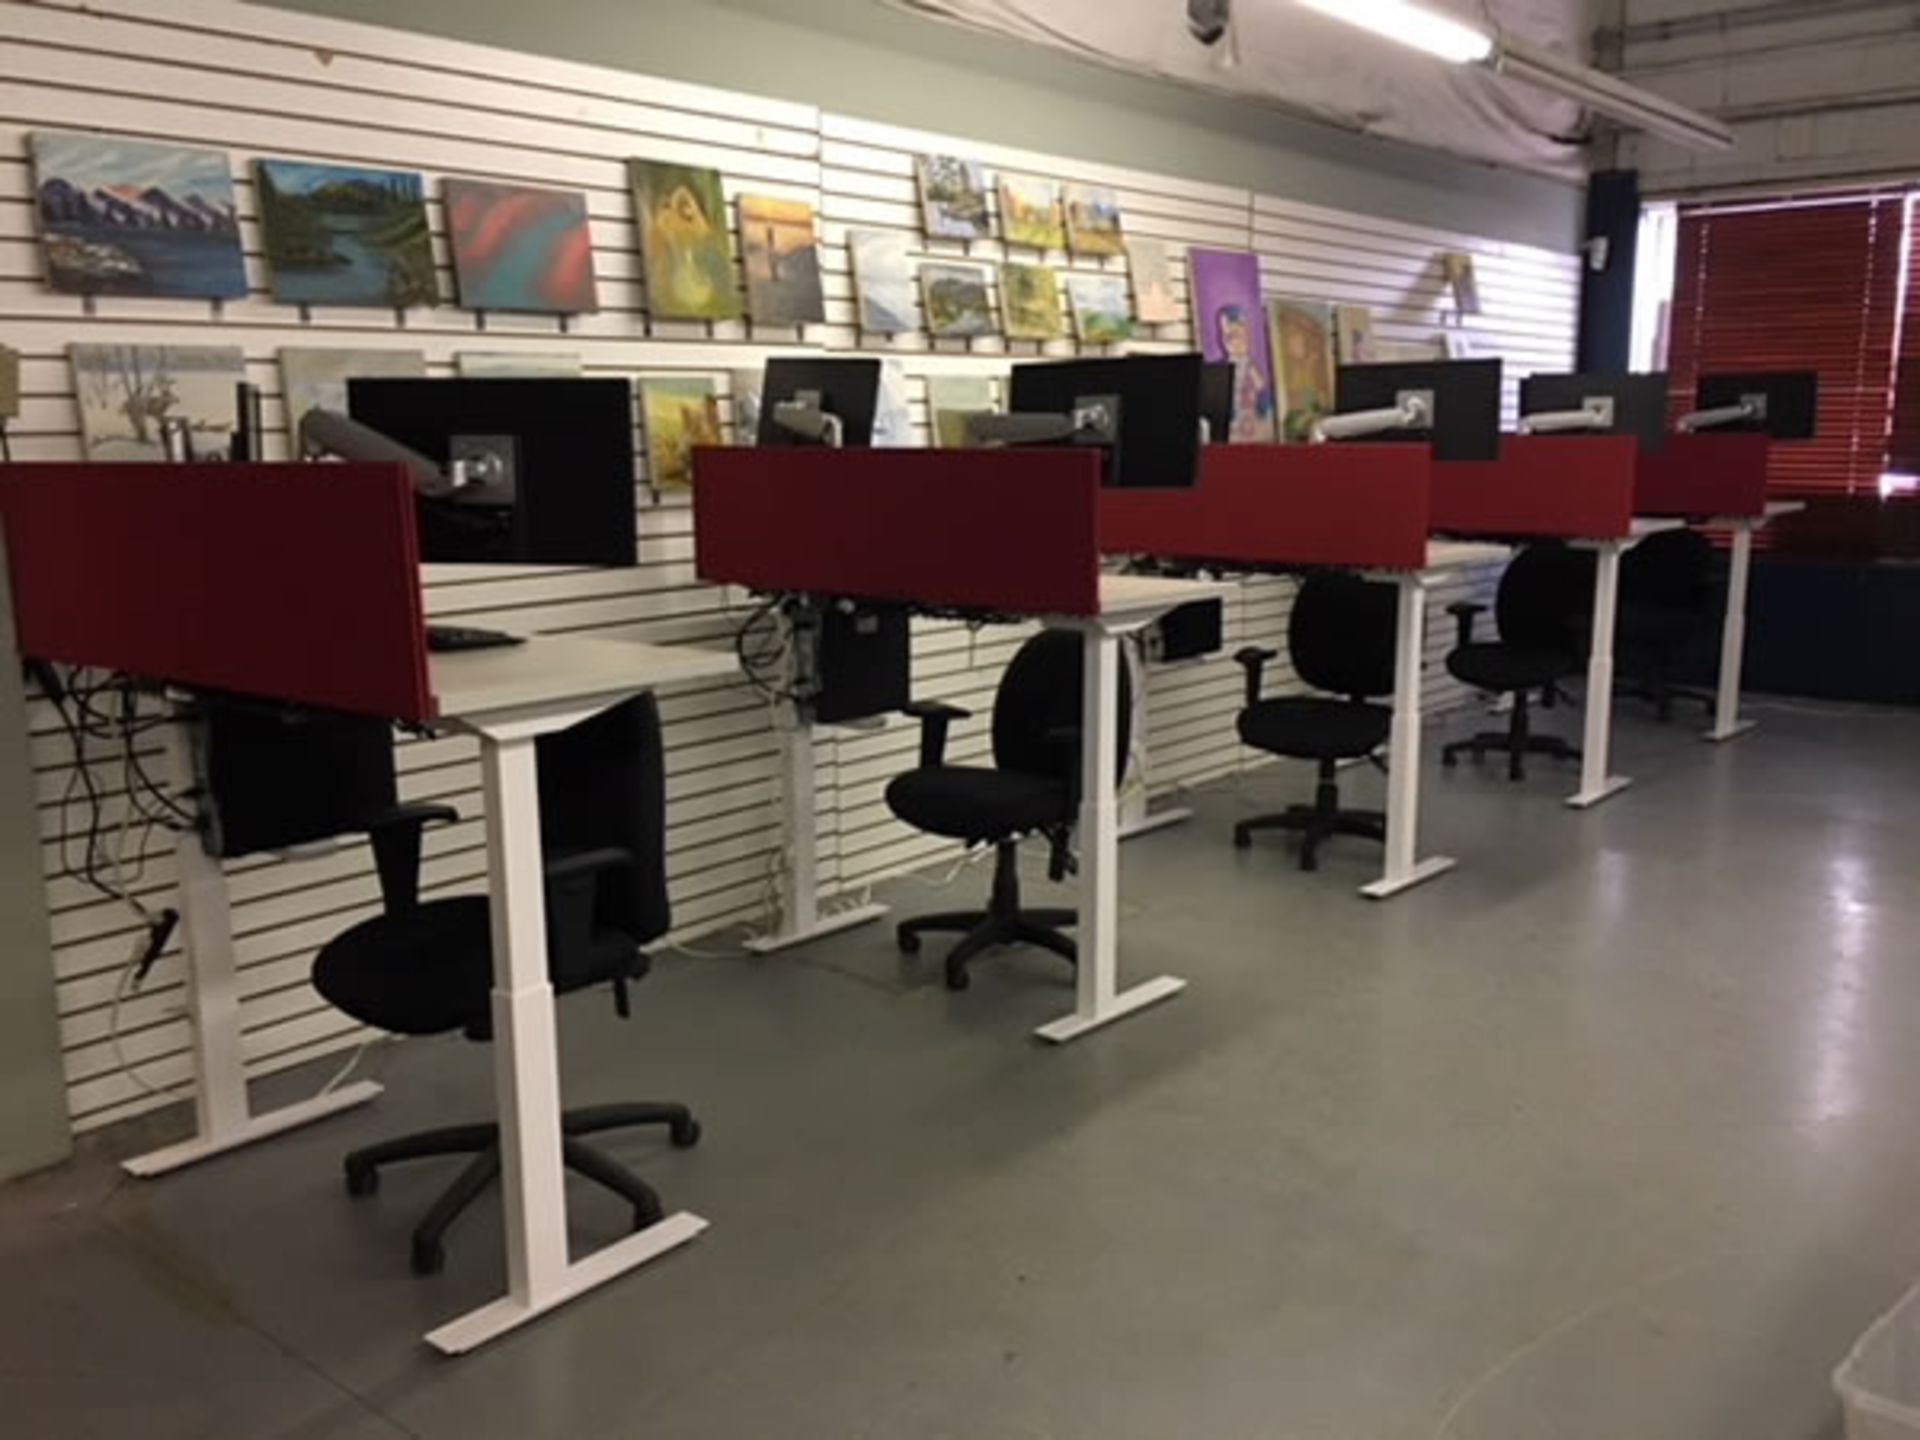 BANKRUPTY SALE: OVER 625 LOTS! - MODERN OFFICE FURNITURE, COMPUTERS, WAREHOUSE,ETC. - Image 2 of 12